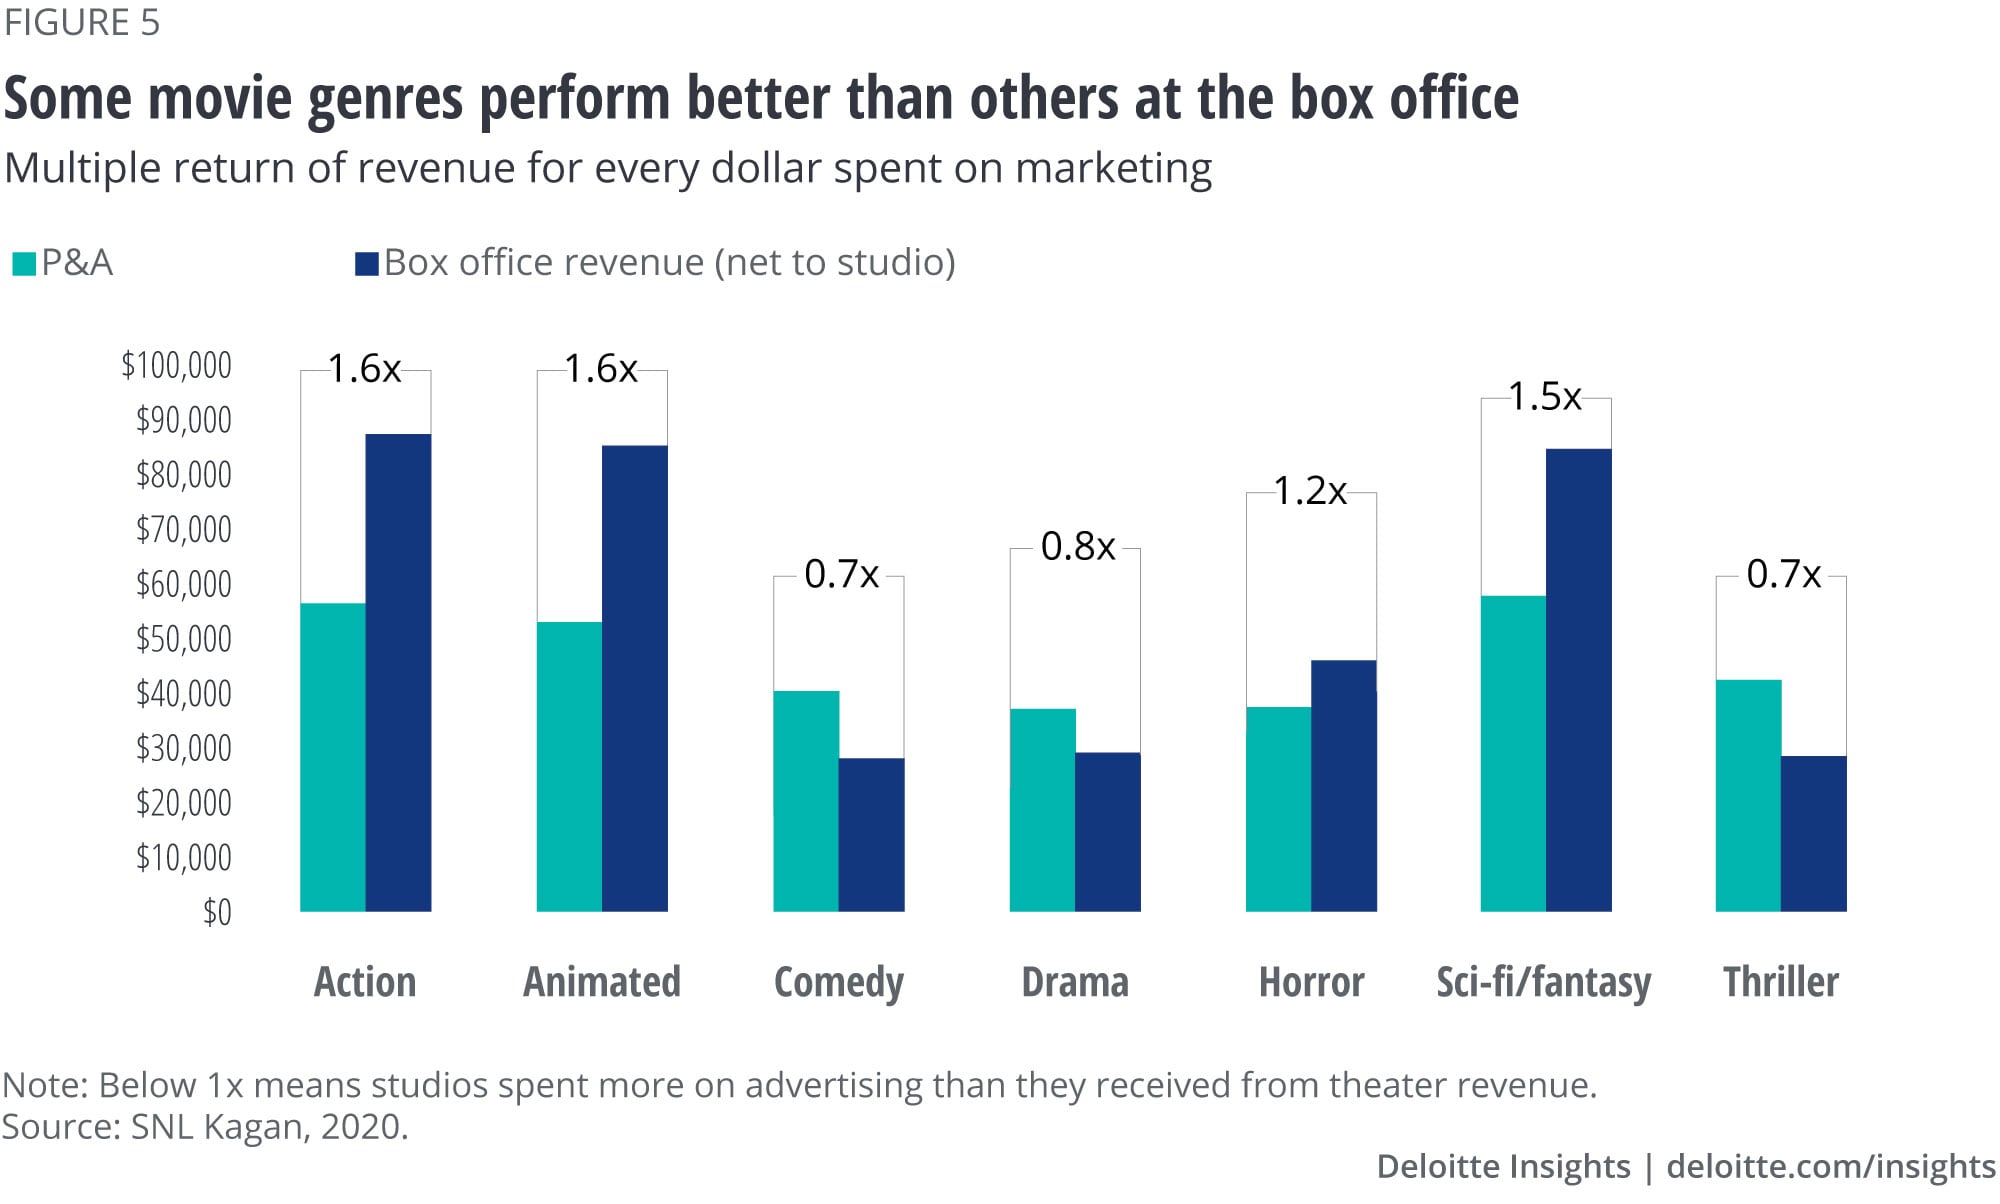 Some movie genres perform better than others at the box office